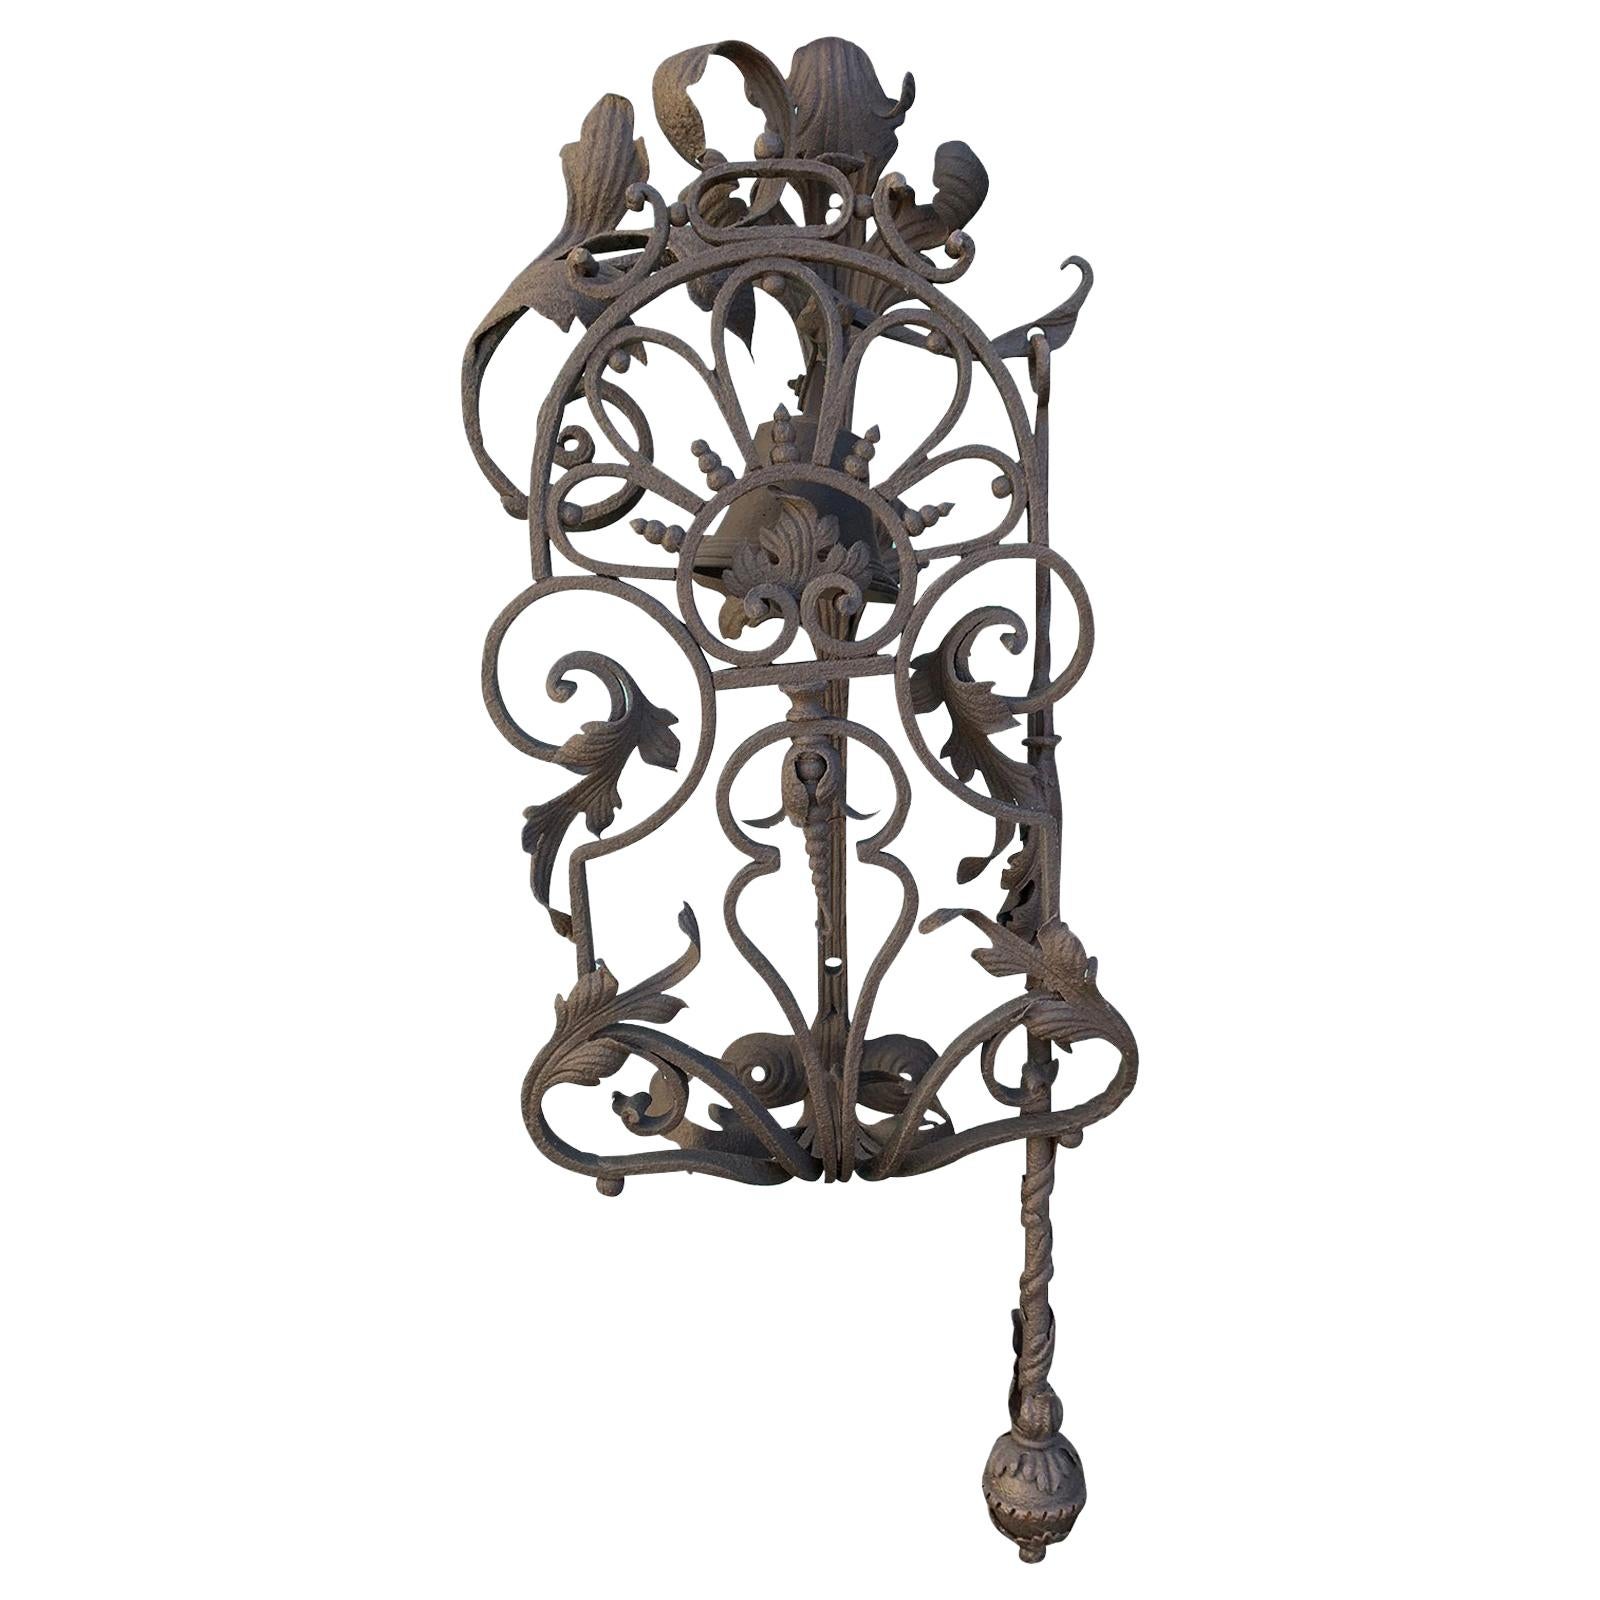 Late 19th-Early 20th Century Continental Handmade Iron Bell